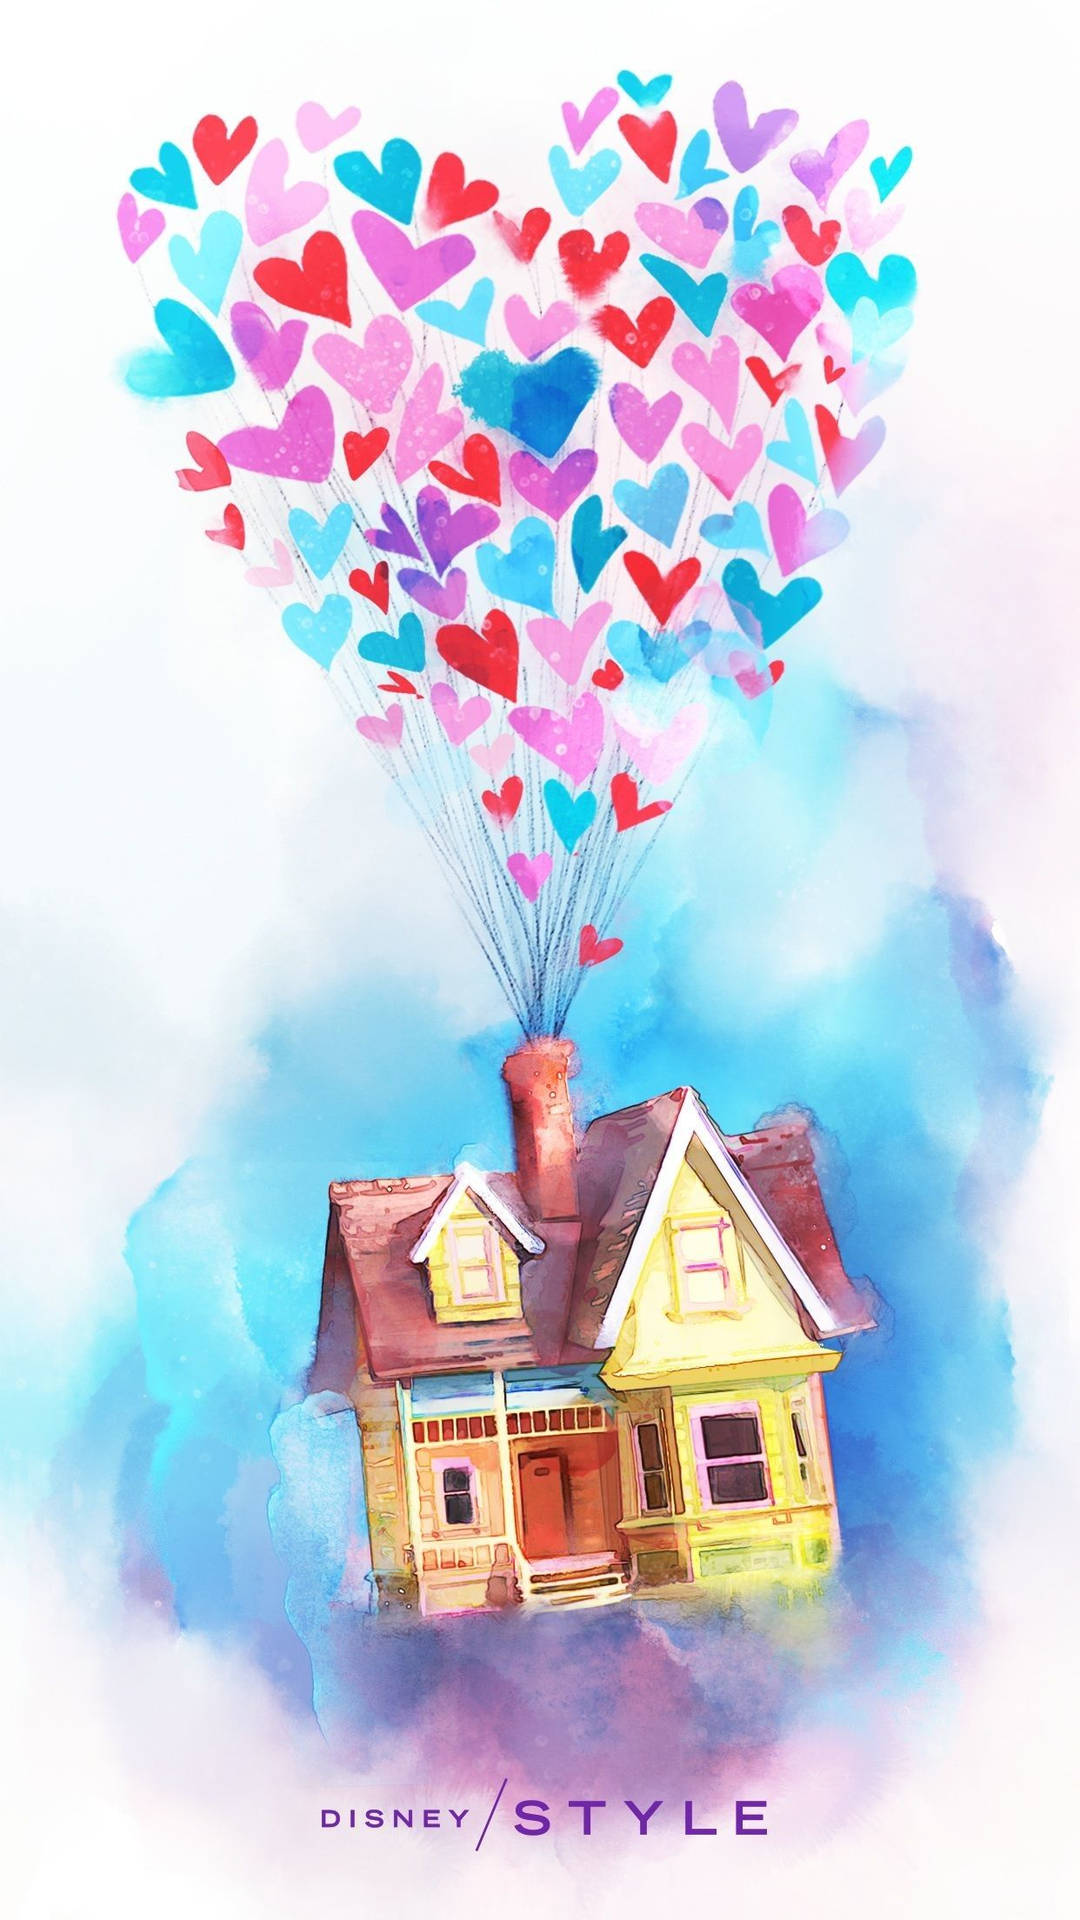 Movie Up Heart Balloons Painting